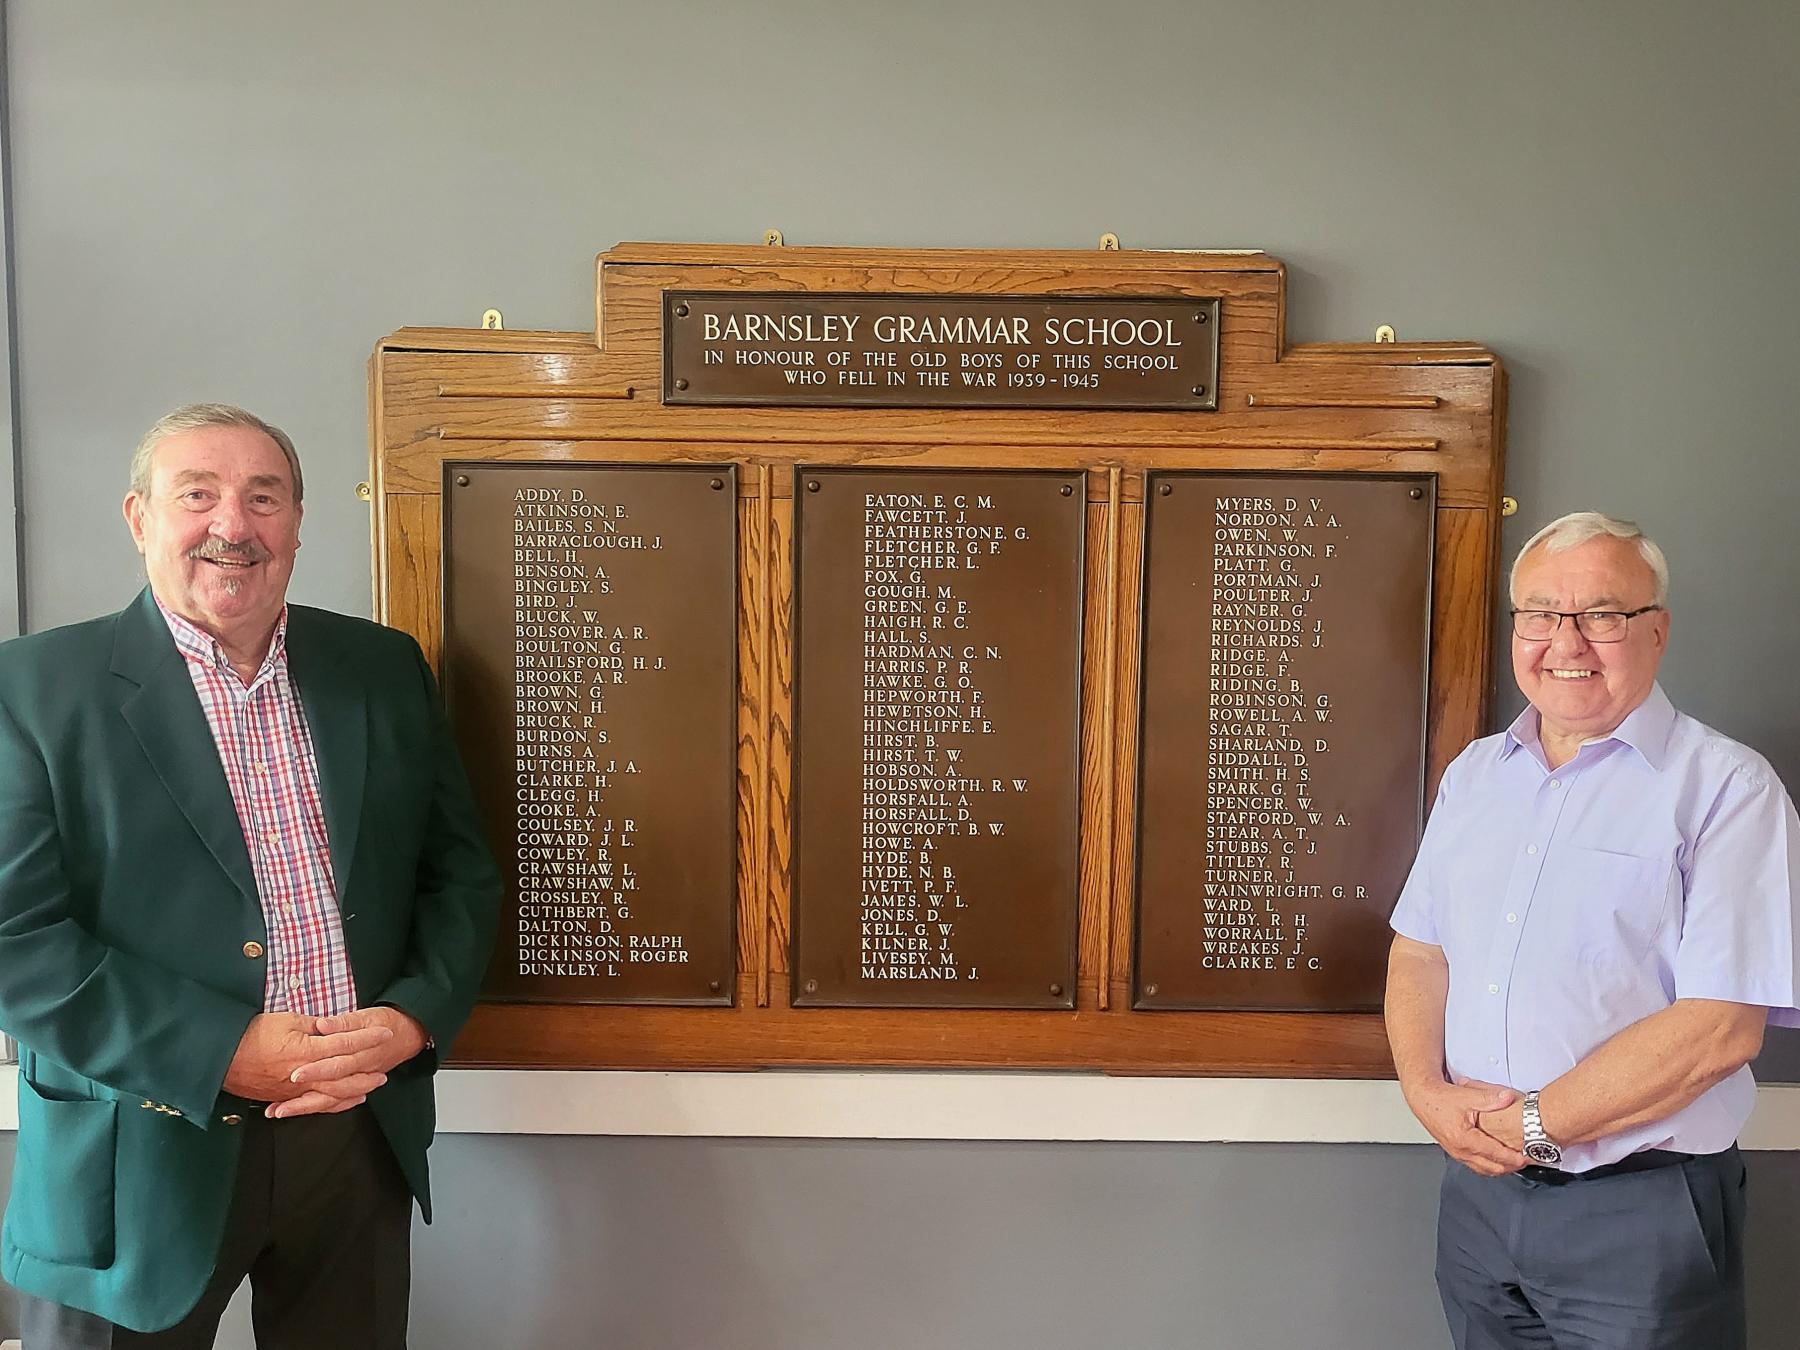 Ian Harley and Melvyn Lunn at the Memorial Board in Shaw Lane